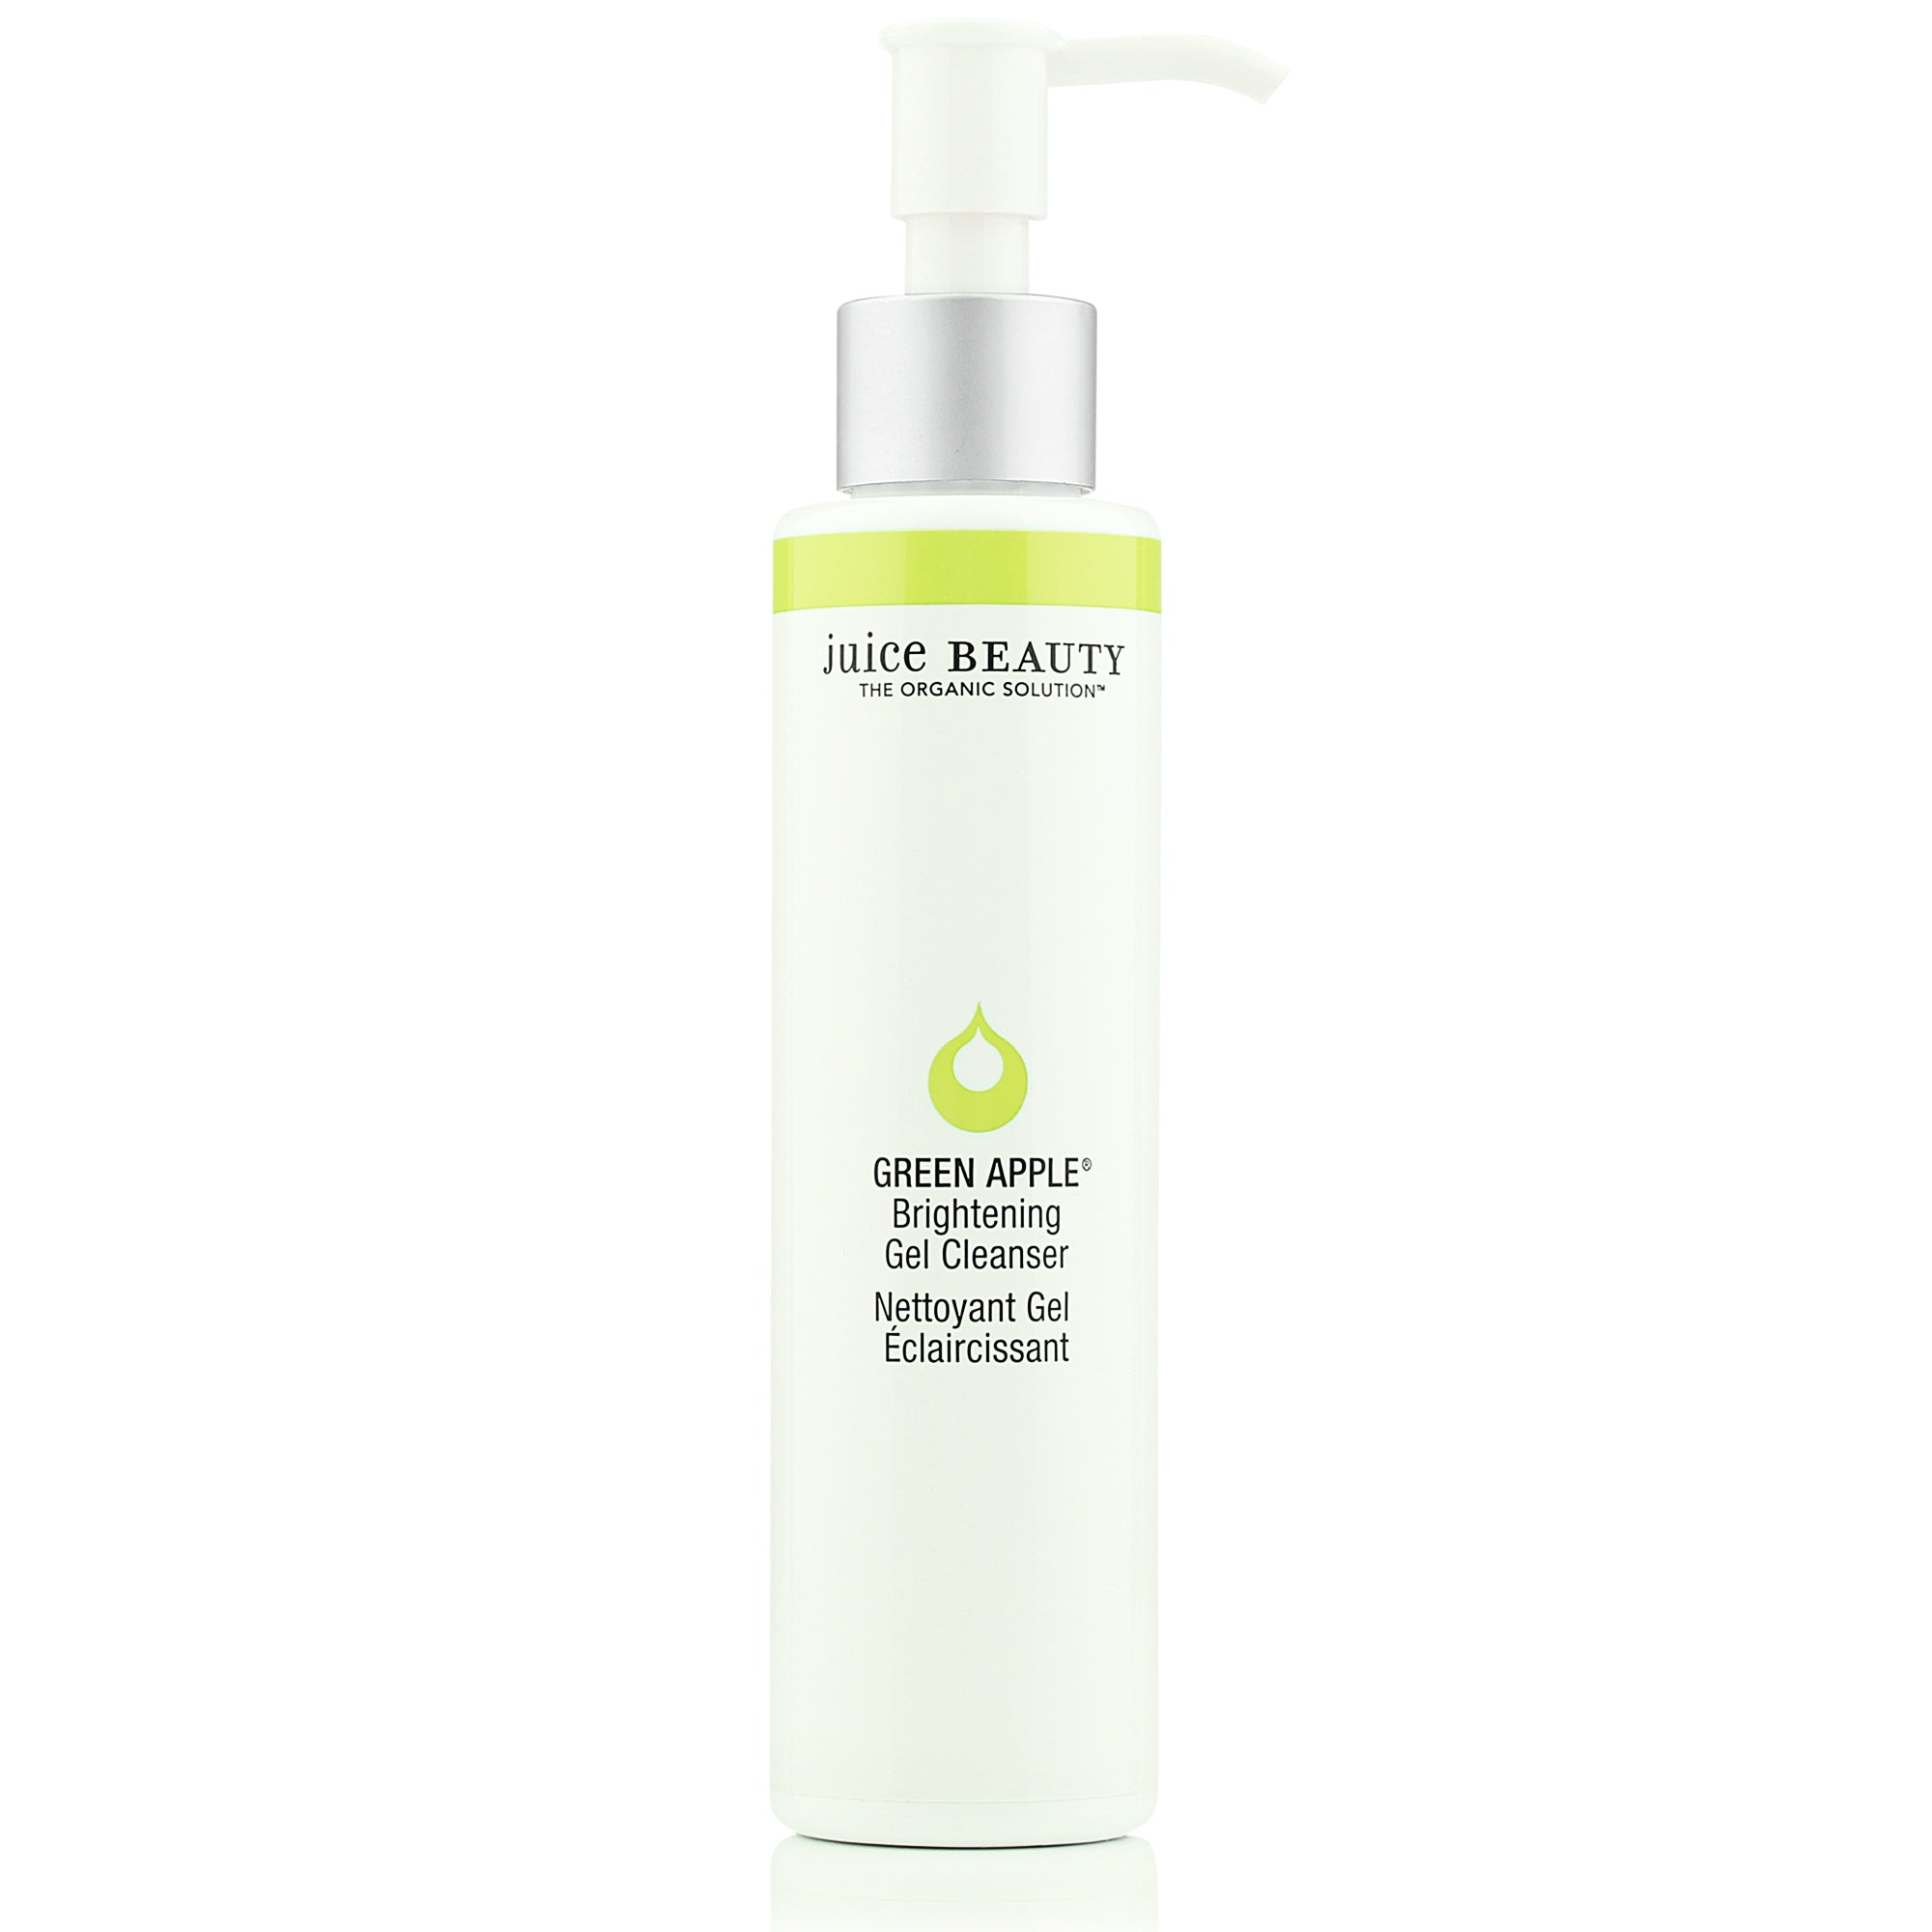 Mad Skincare Brightening Cleanser. Джус Бьюти Органик. Universal Cleansing Gel. Aha Cleansing Gel. Brightening cleanser